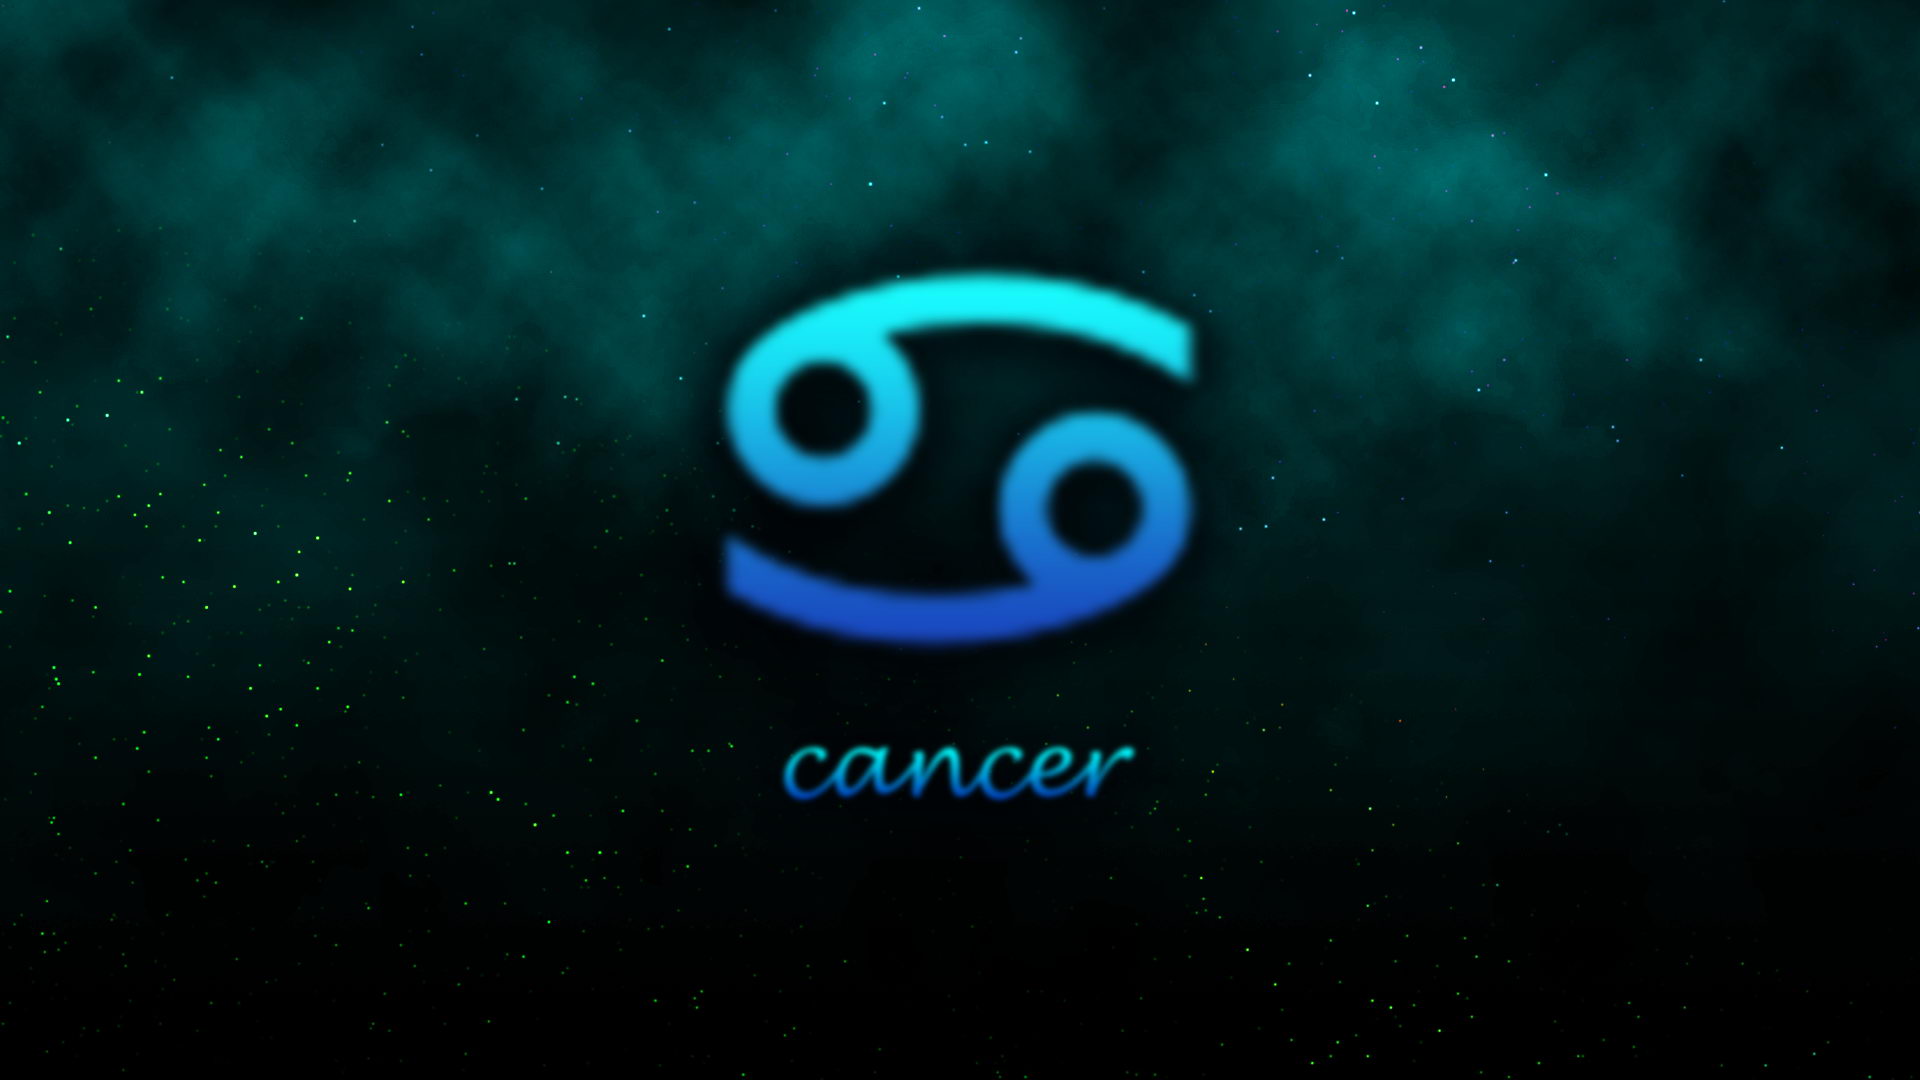 Widescreen High Resolution Wallpaper Of Cancer For